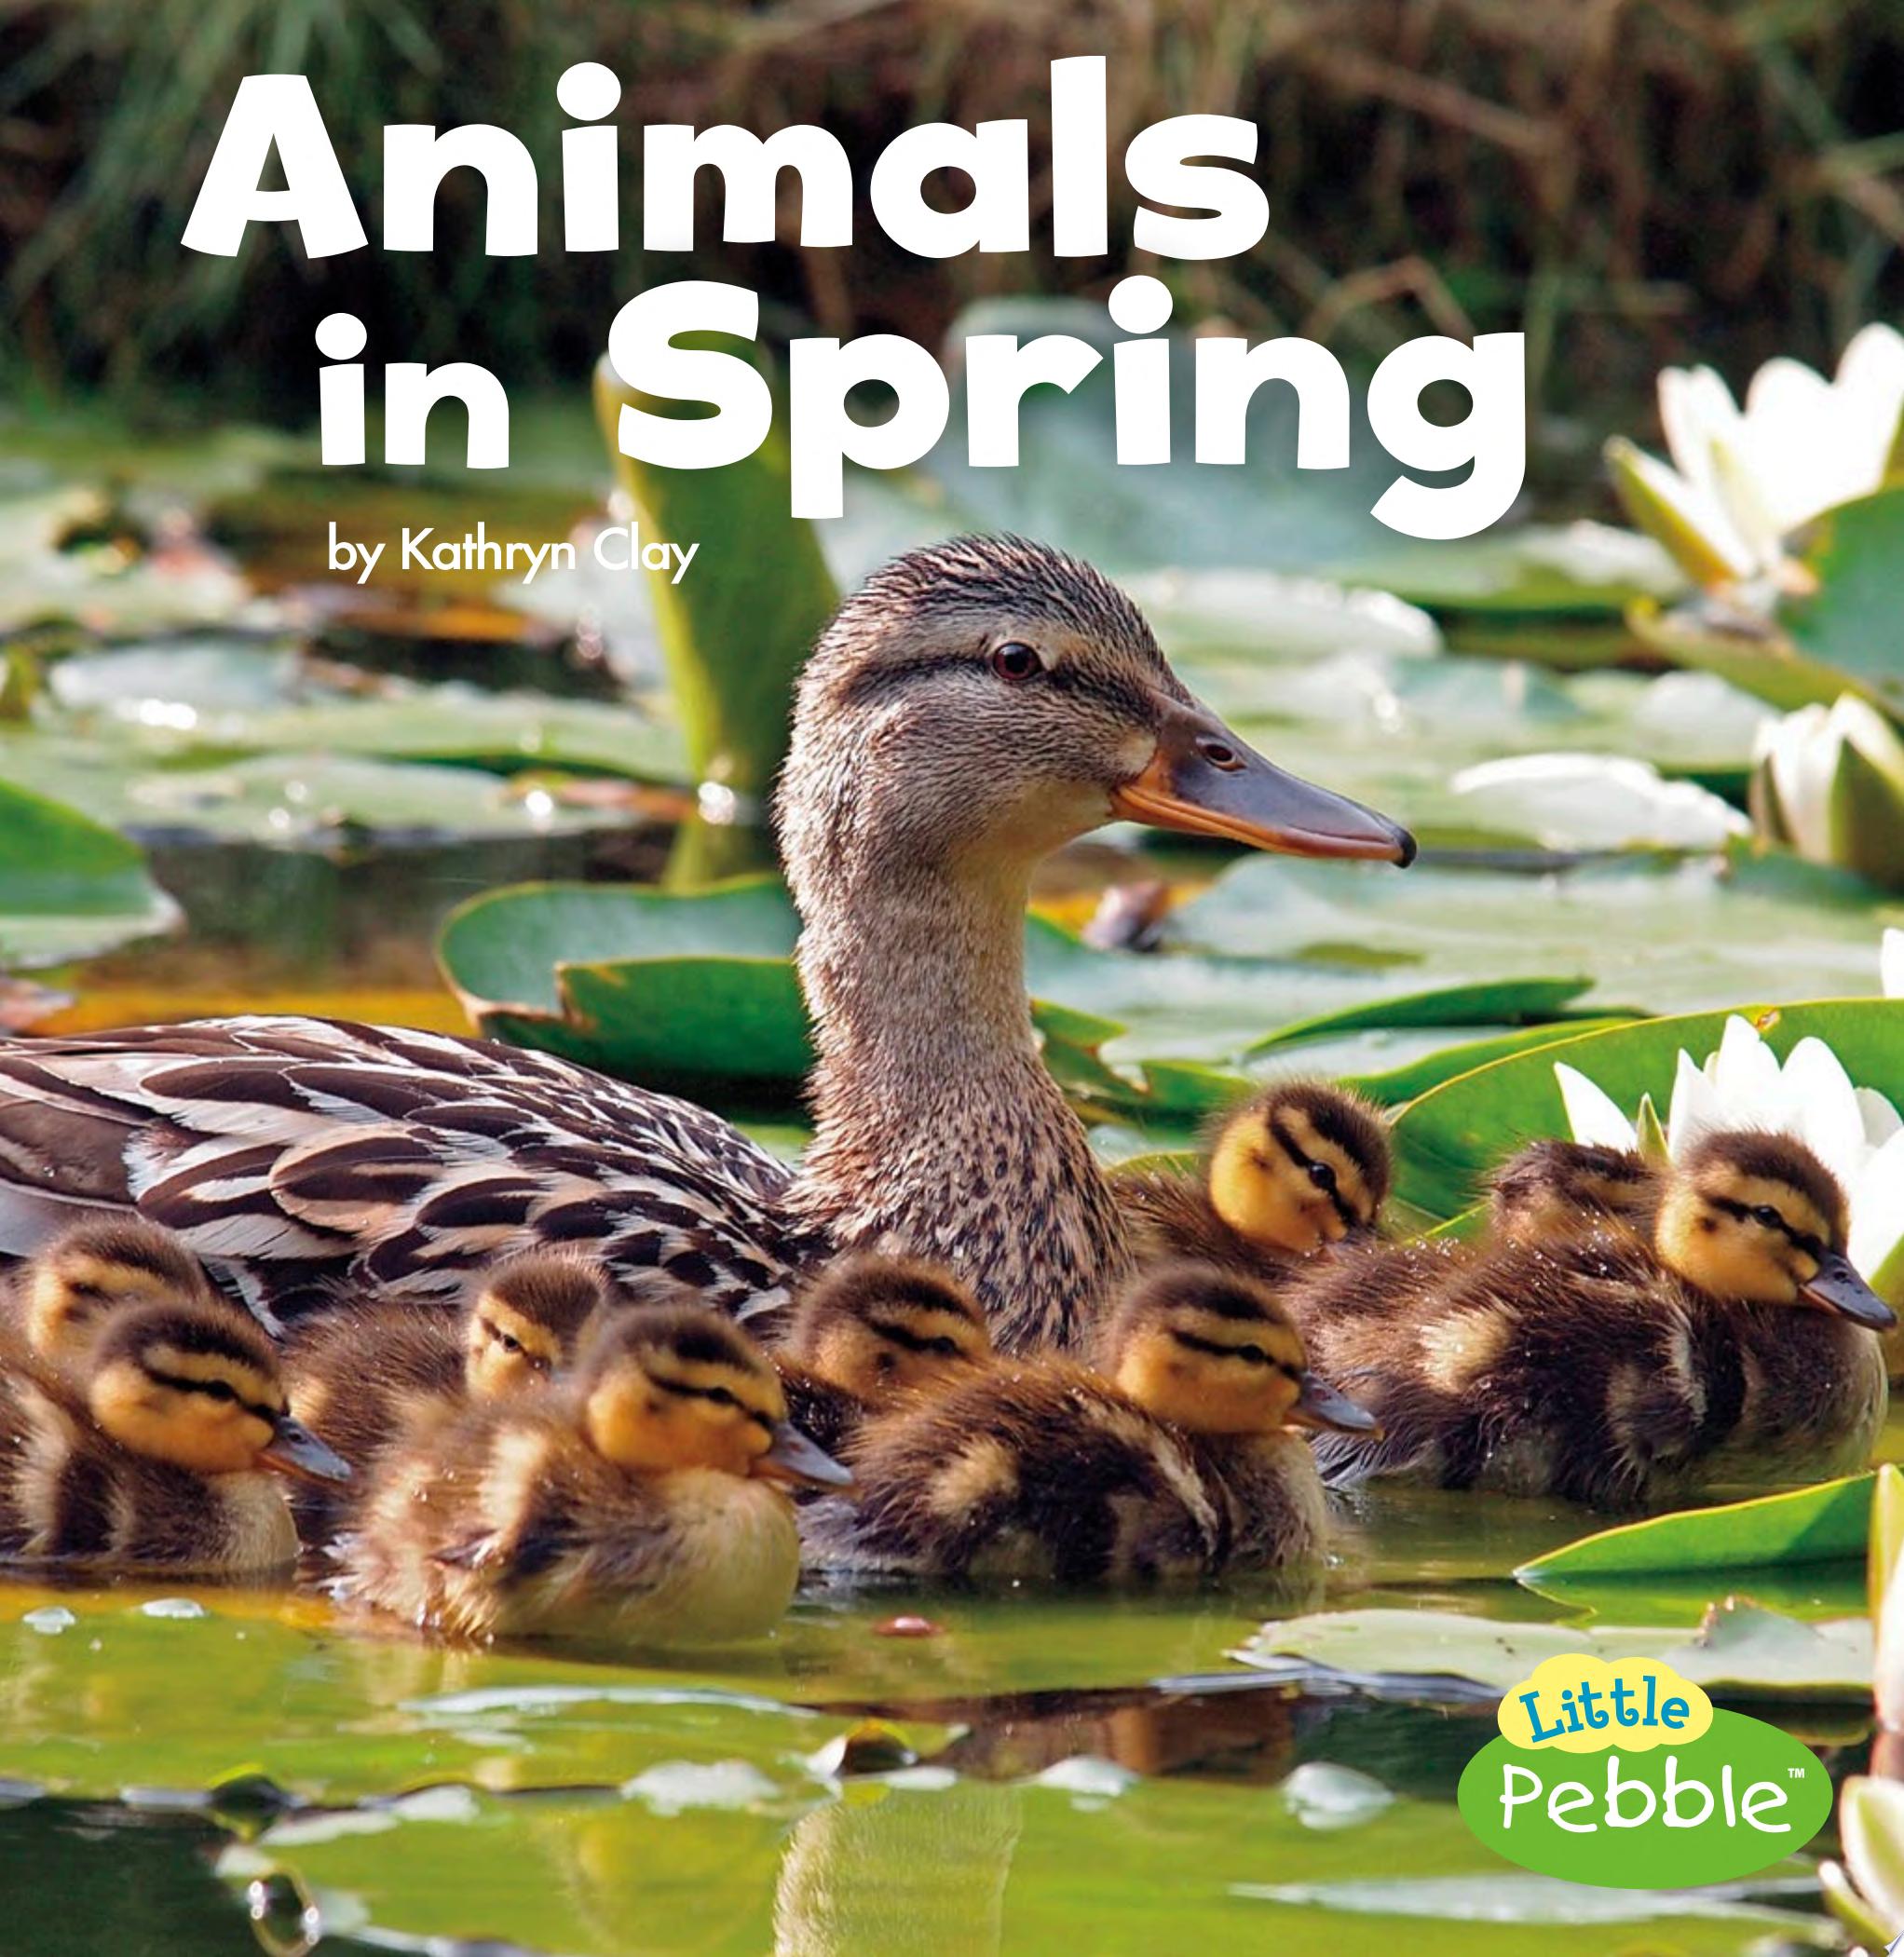 Image for "Animals in Spring"